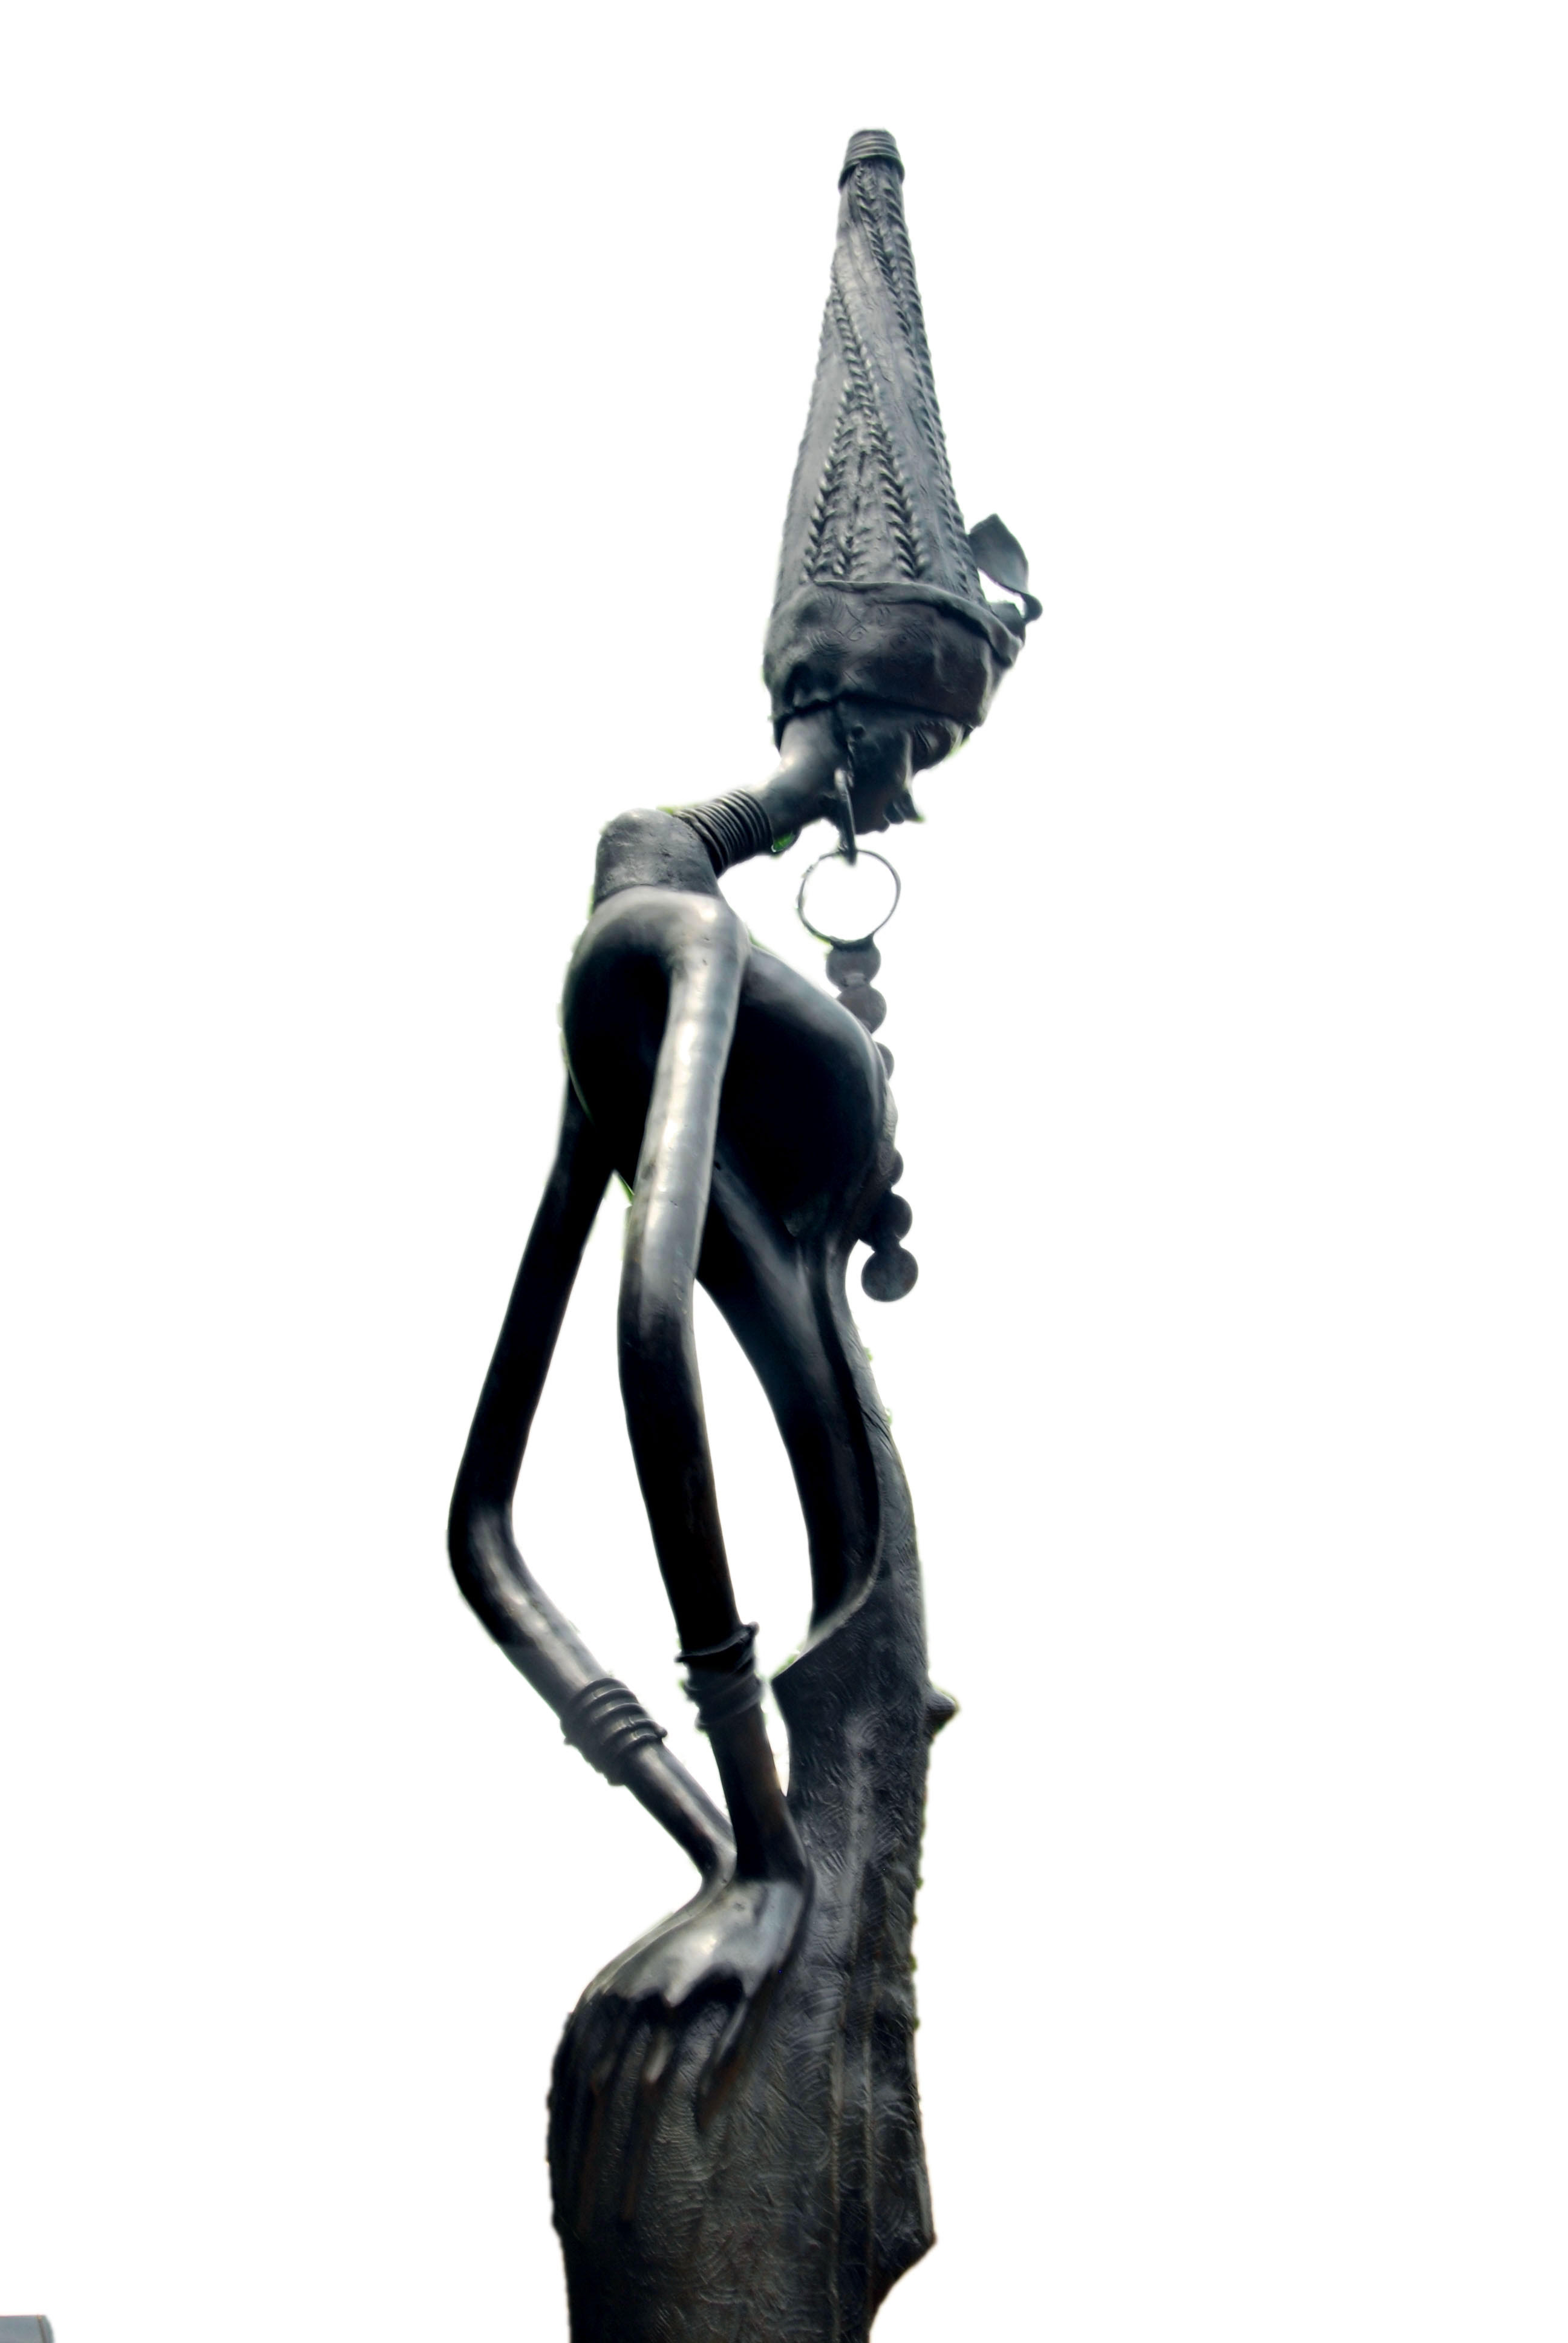 Dr. Njoku Kenneth, "Tall among equals", bronze sculpture, 325 x 42 x 31cm, 50kg, c. 2018. Presents a - Image 2 of 6